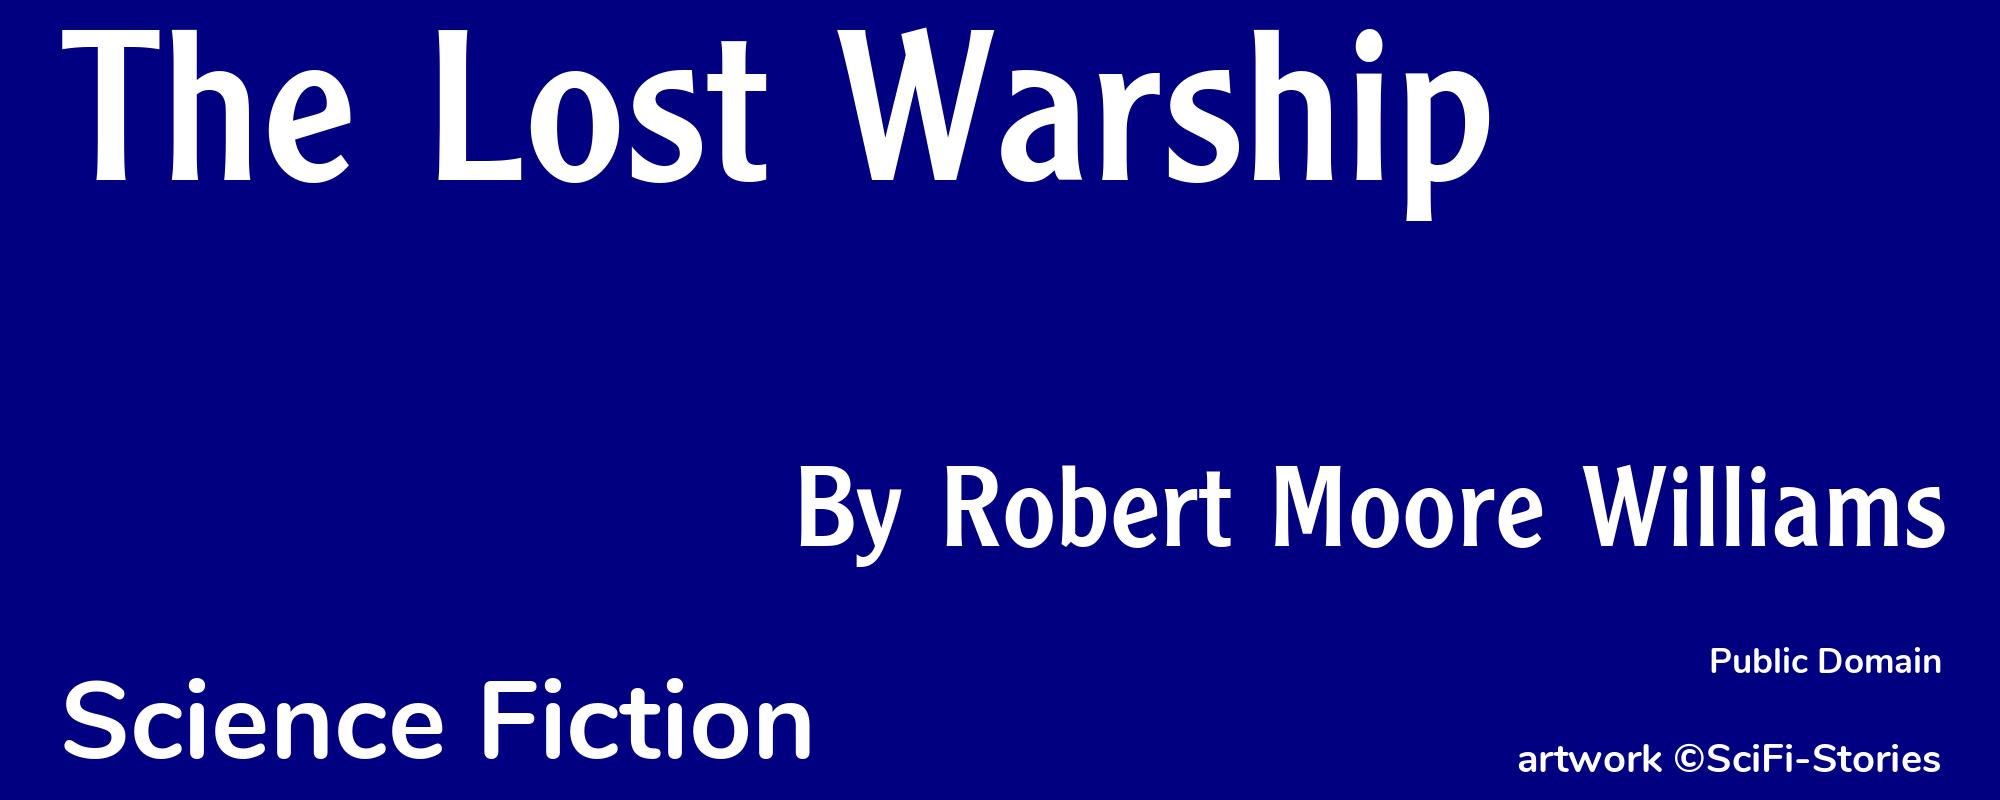 The Lost Warship - Cover